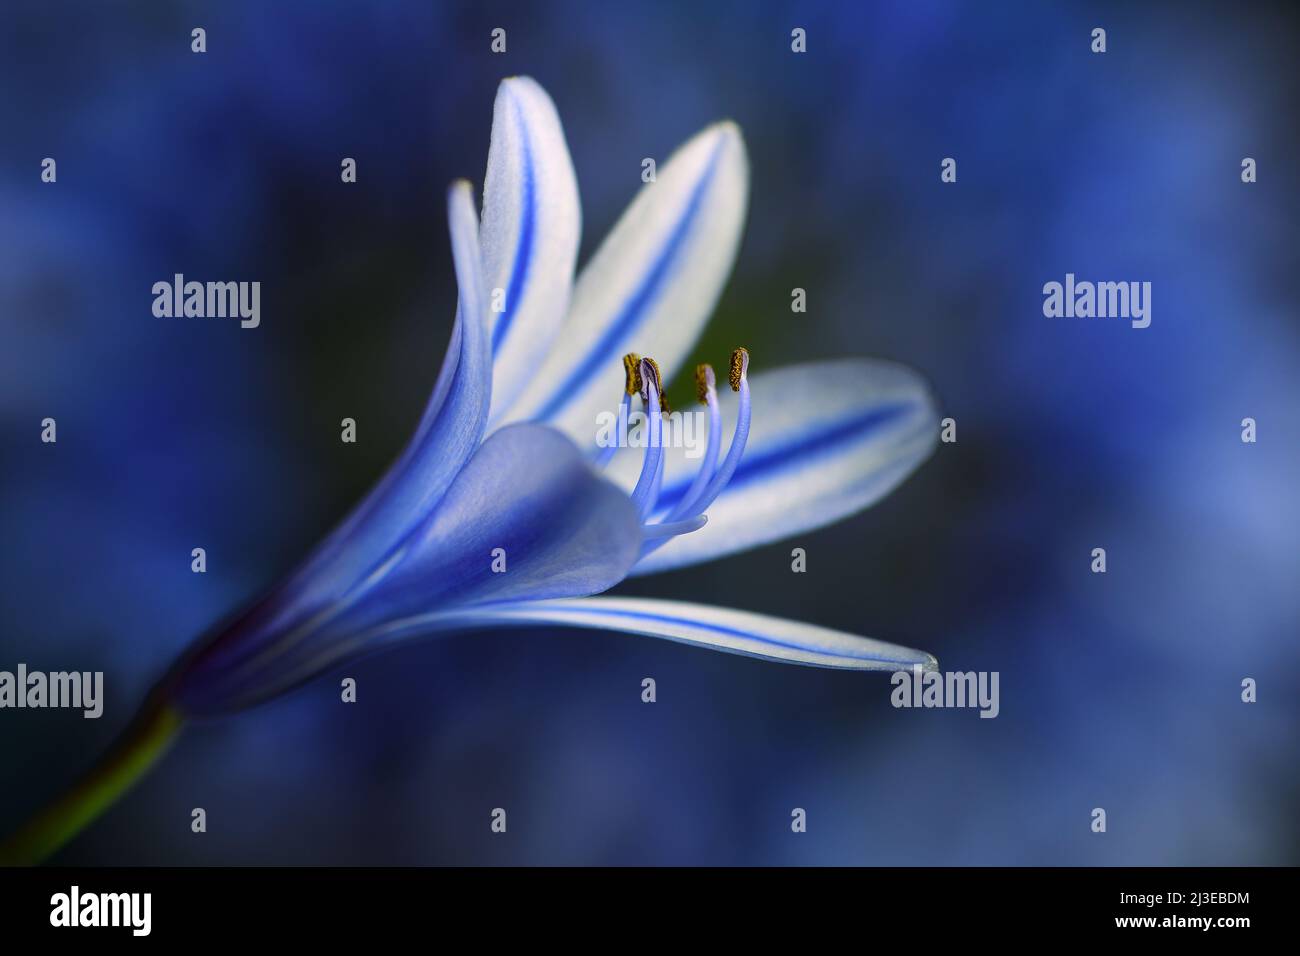 An extreme close-up of a single blue Agapanthus -Agapanthus praecox- flower separated from the whole cluster, in soft, dark blue mood lighting Stock Photo